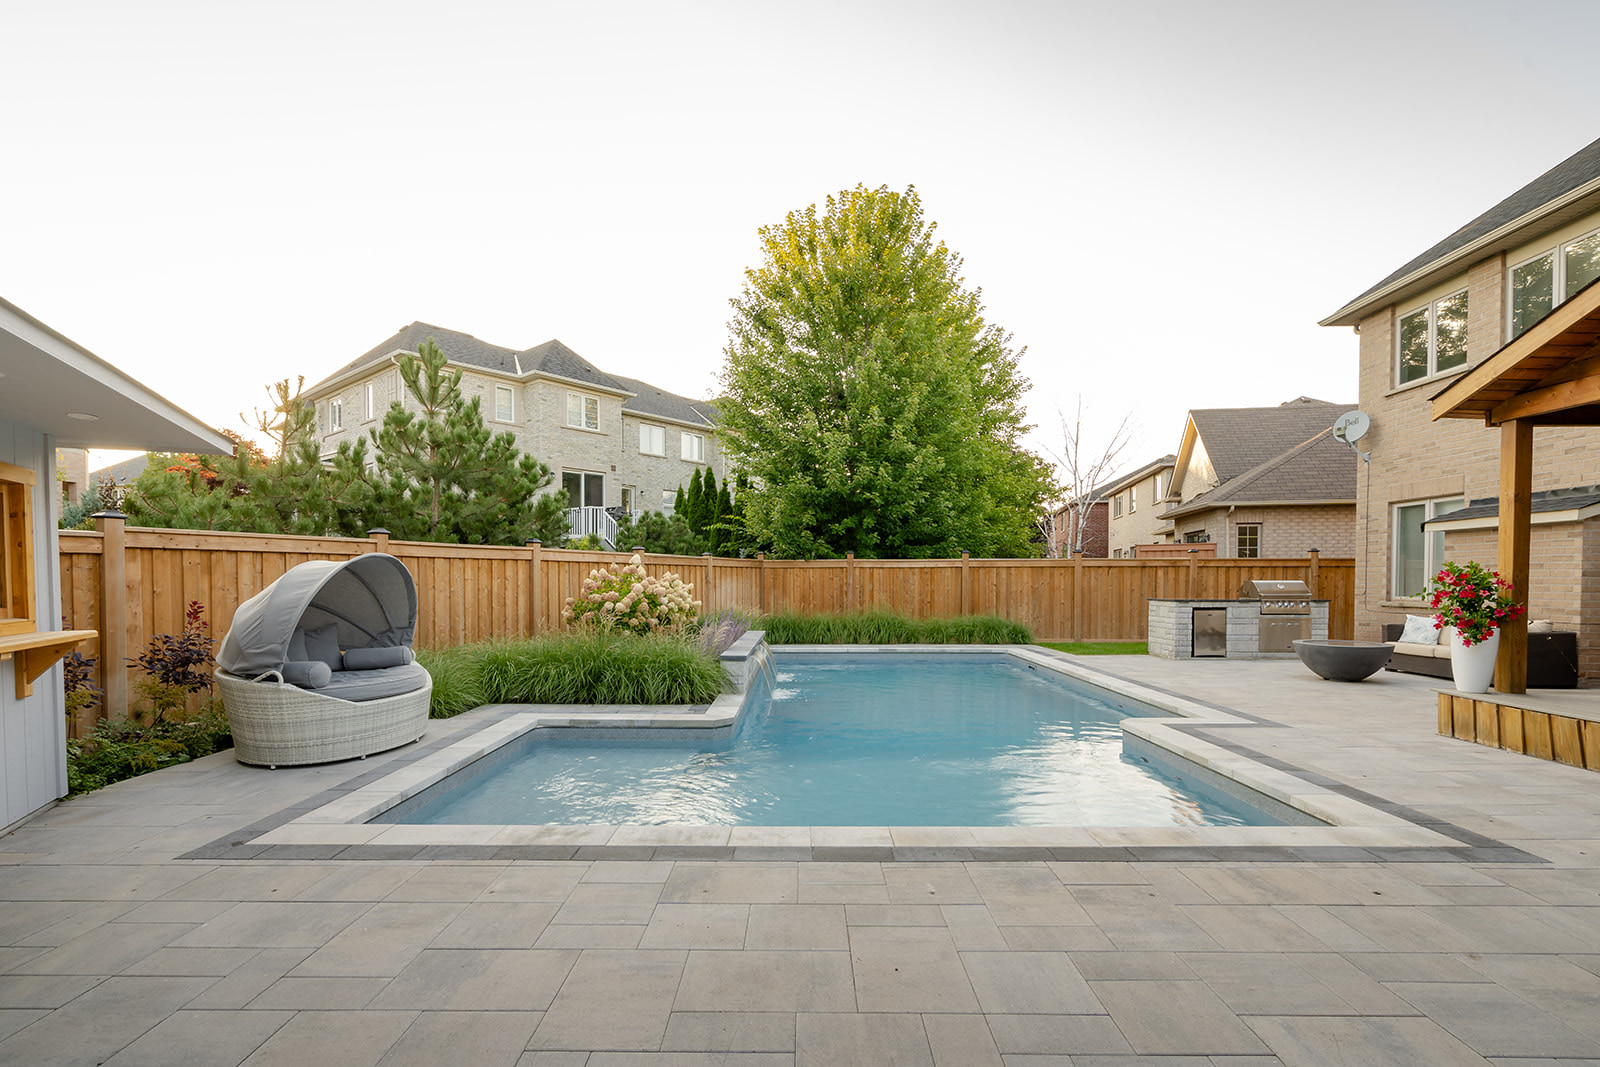 An inground pool with seating areas around.